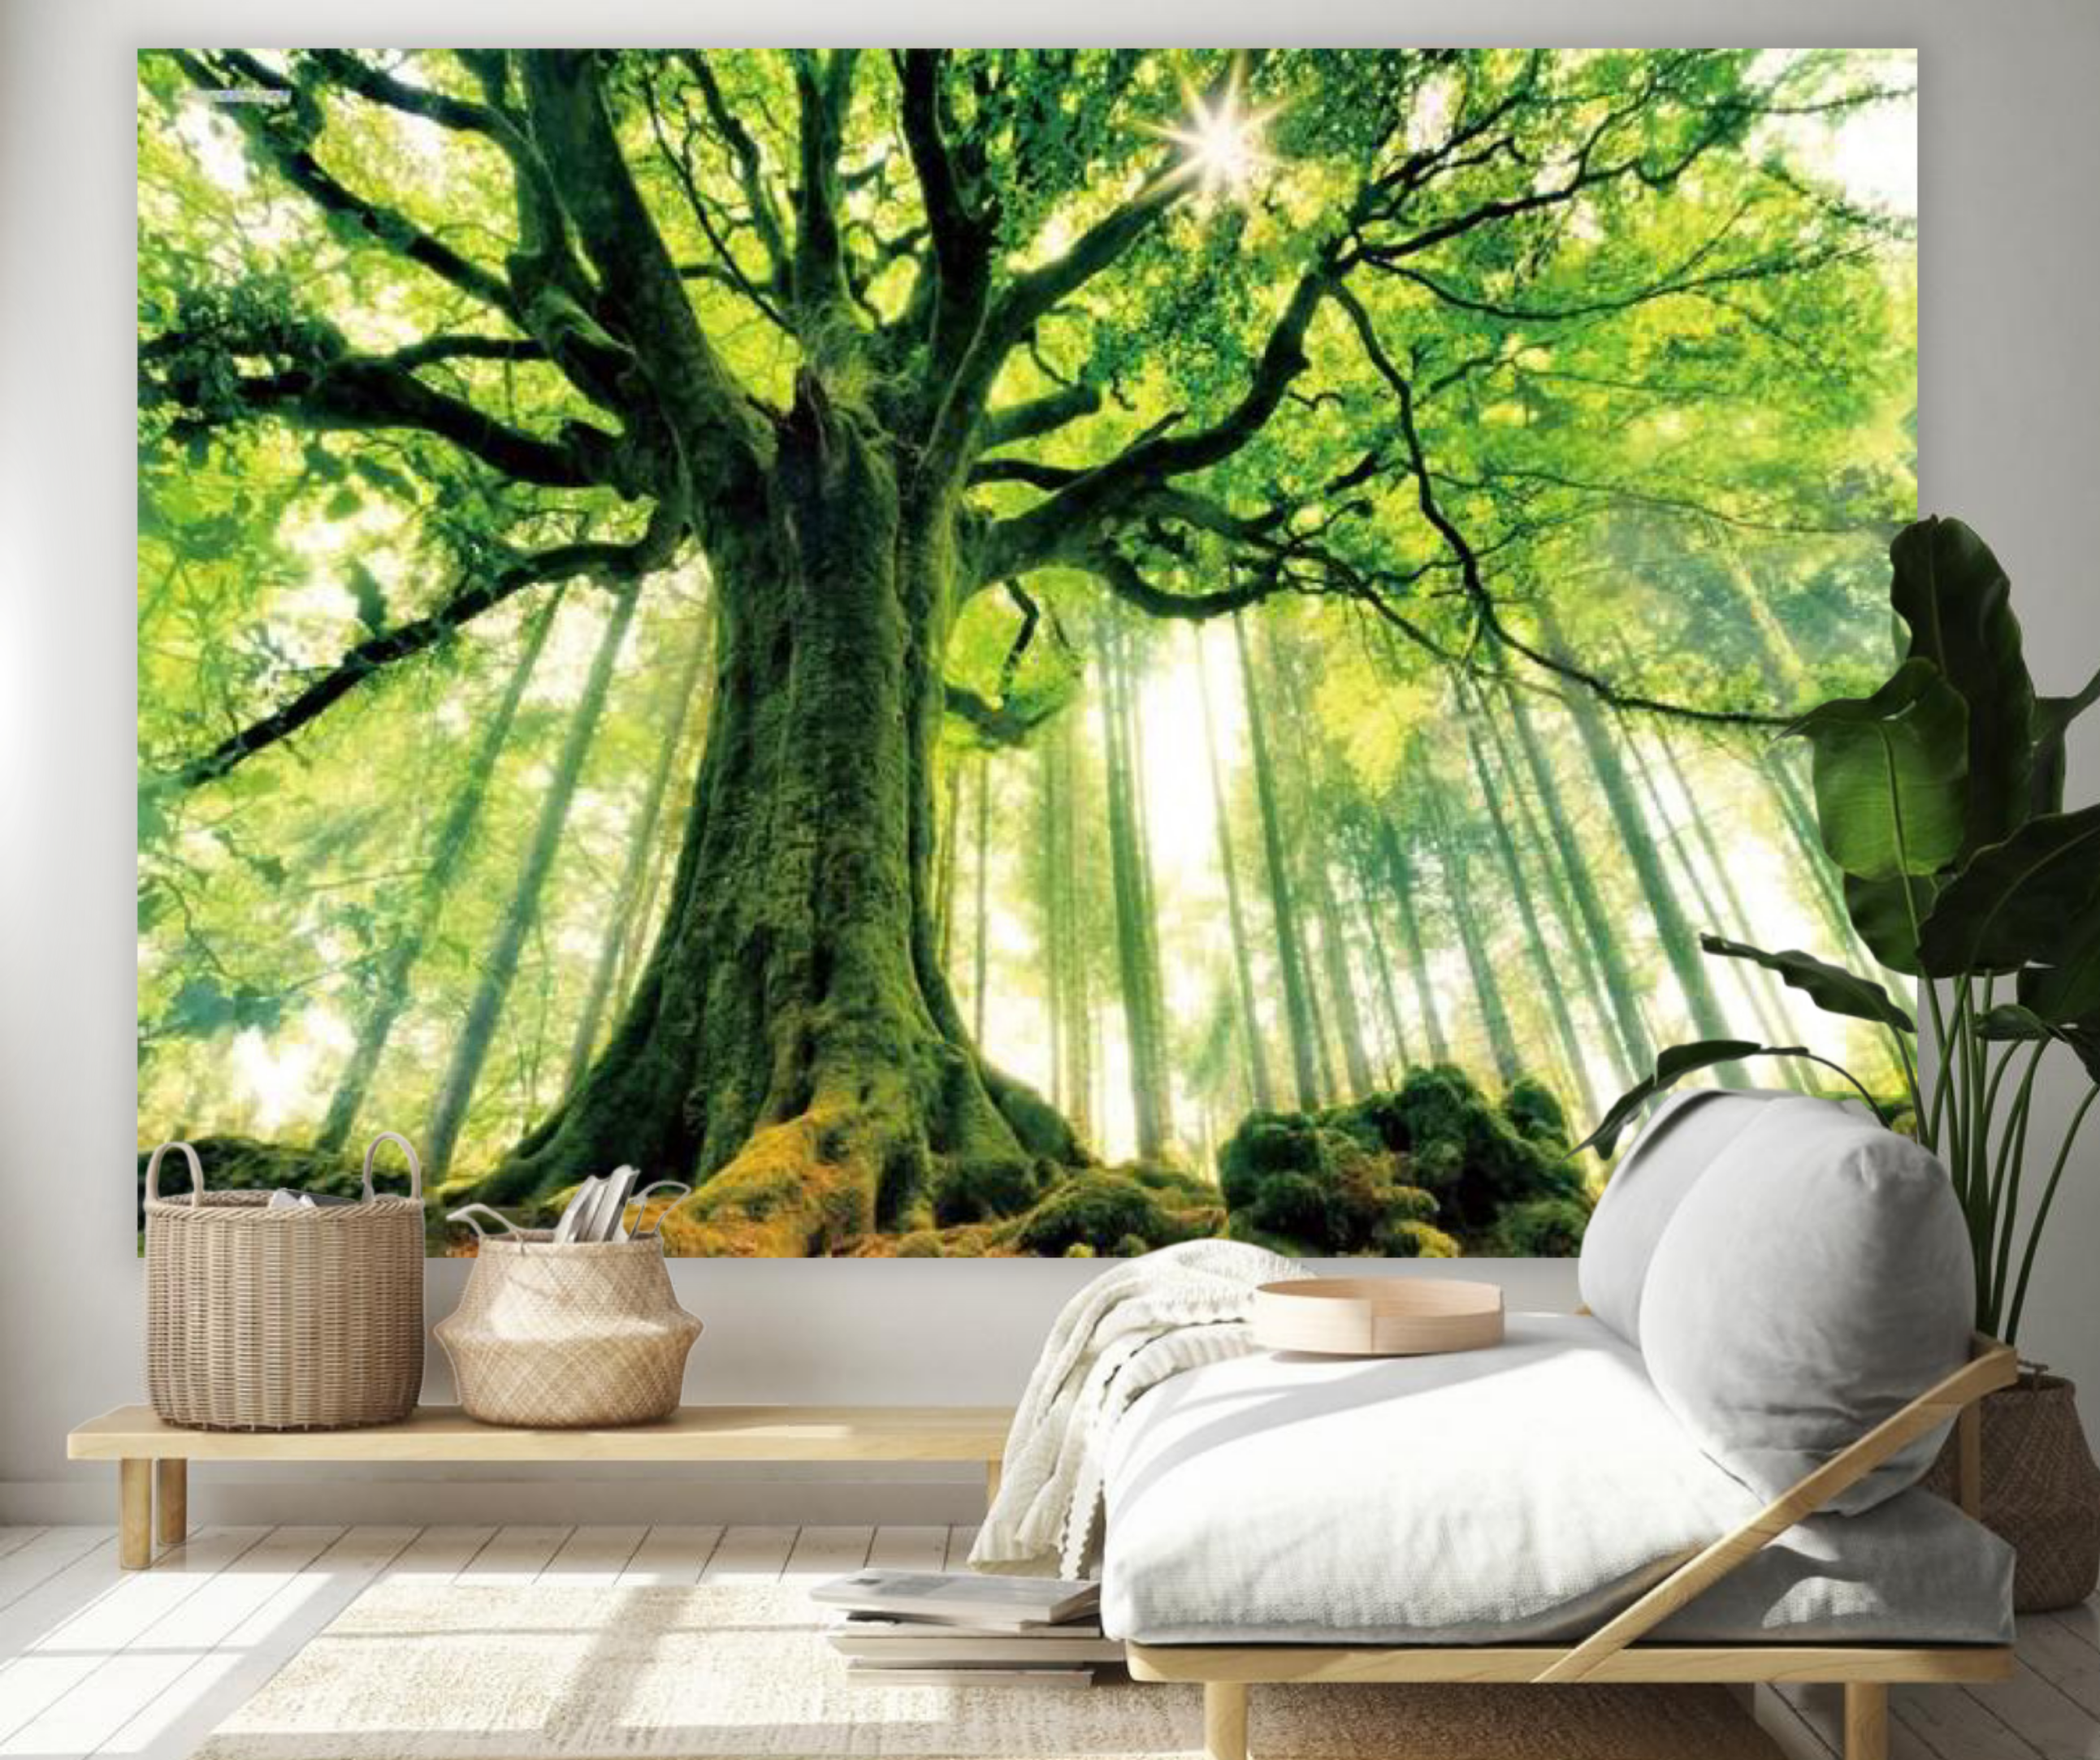 KaiSha Tapestry Wall Hanging; Home Décor Nature Tree of Life Art Bedroom Green Landscape Garden Forest Backdrop